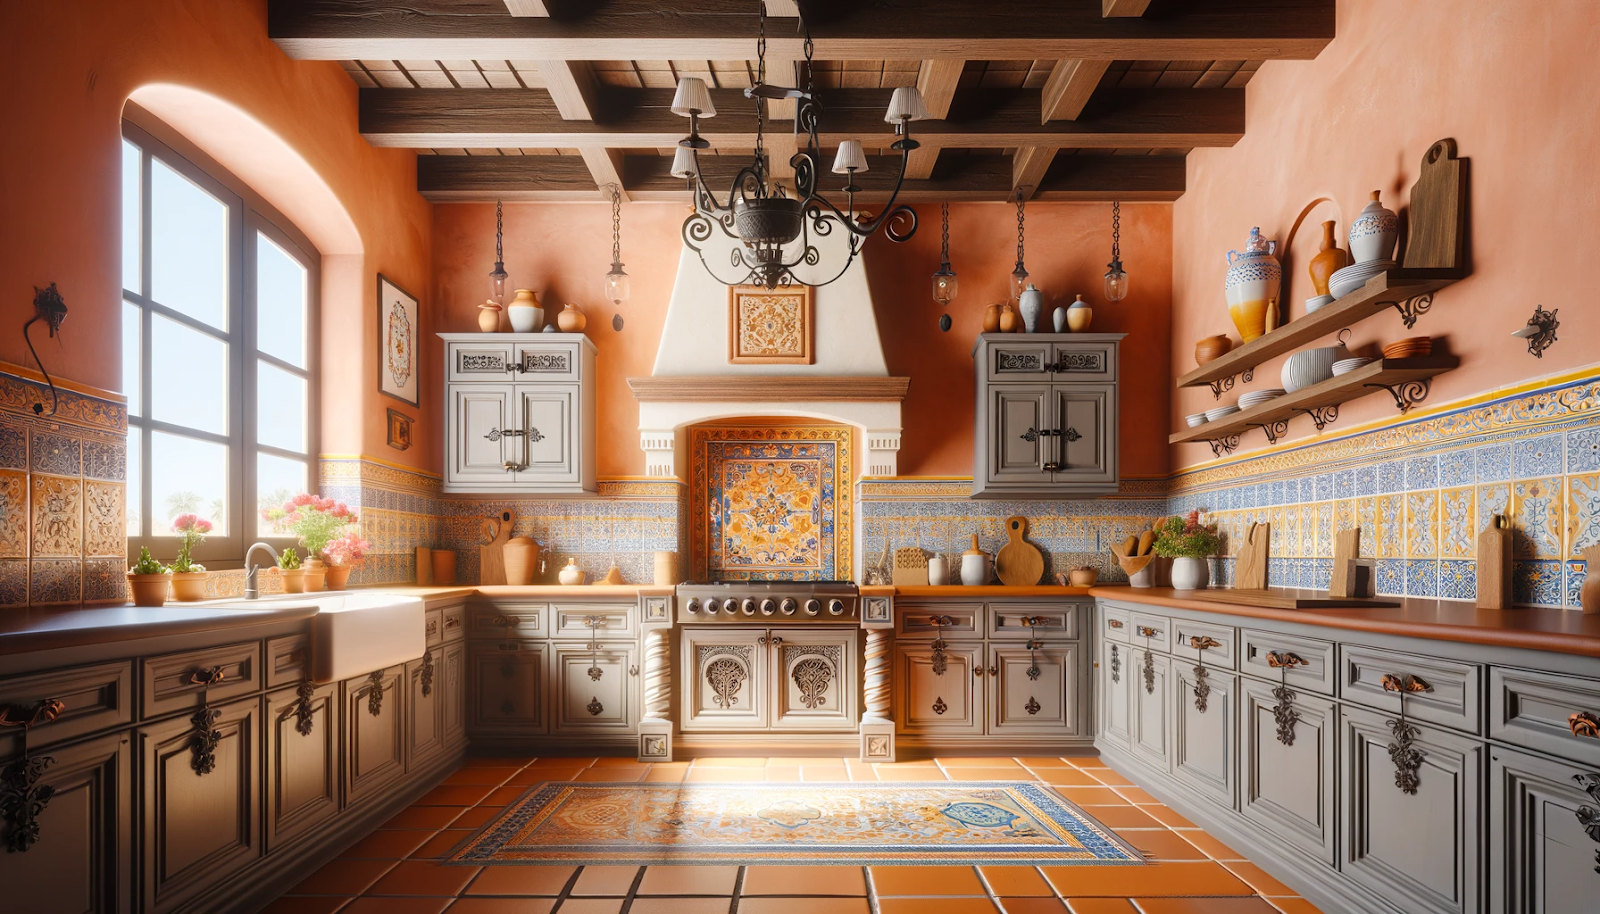 A very open and large Spanish style kitchen with gray cabinets below, two open shelves, and two shelves with doors flanking the stove. The walls are painted a peach fuzz color showing how this color can work with all of the Spanish tile accents